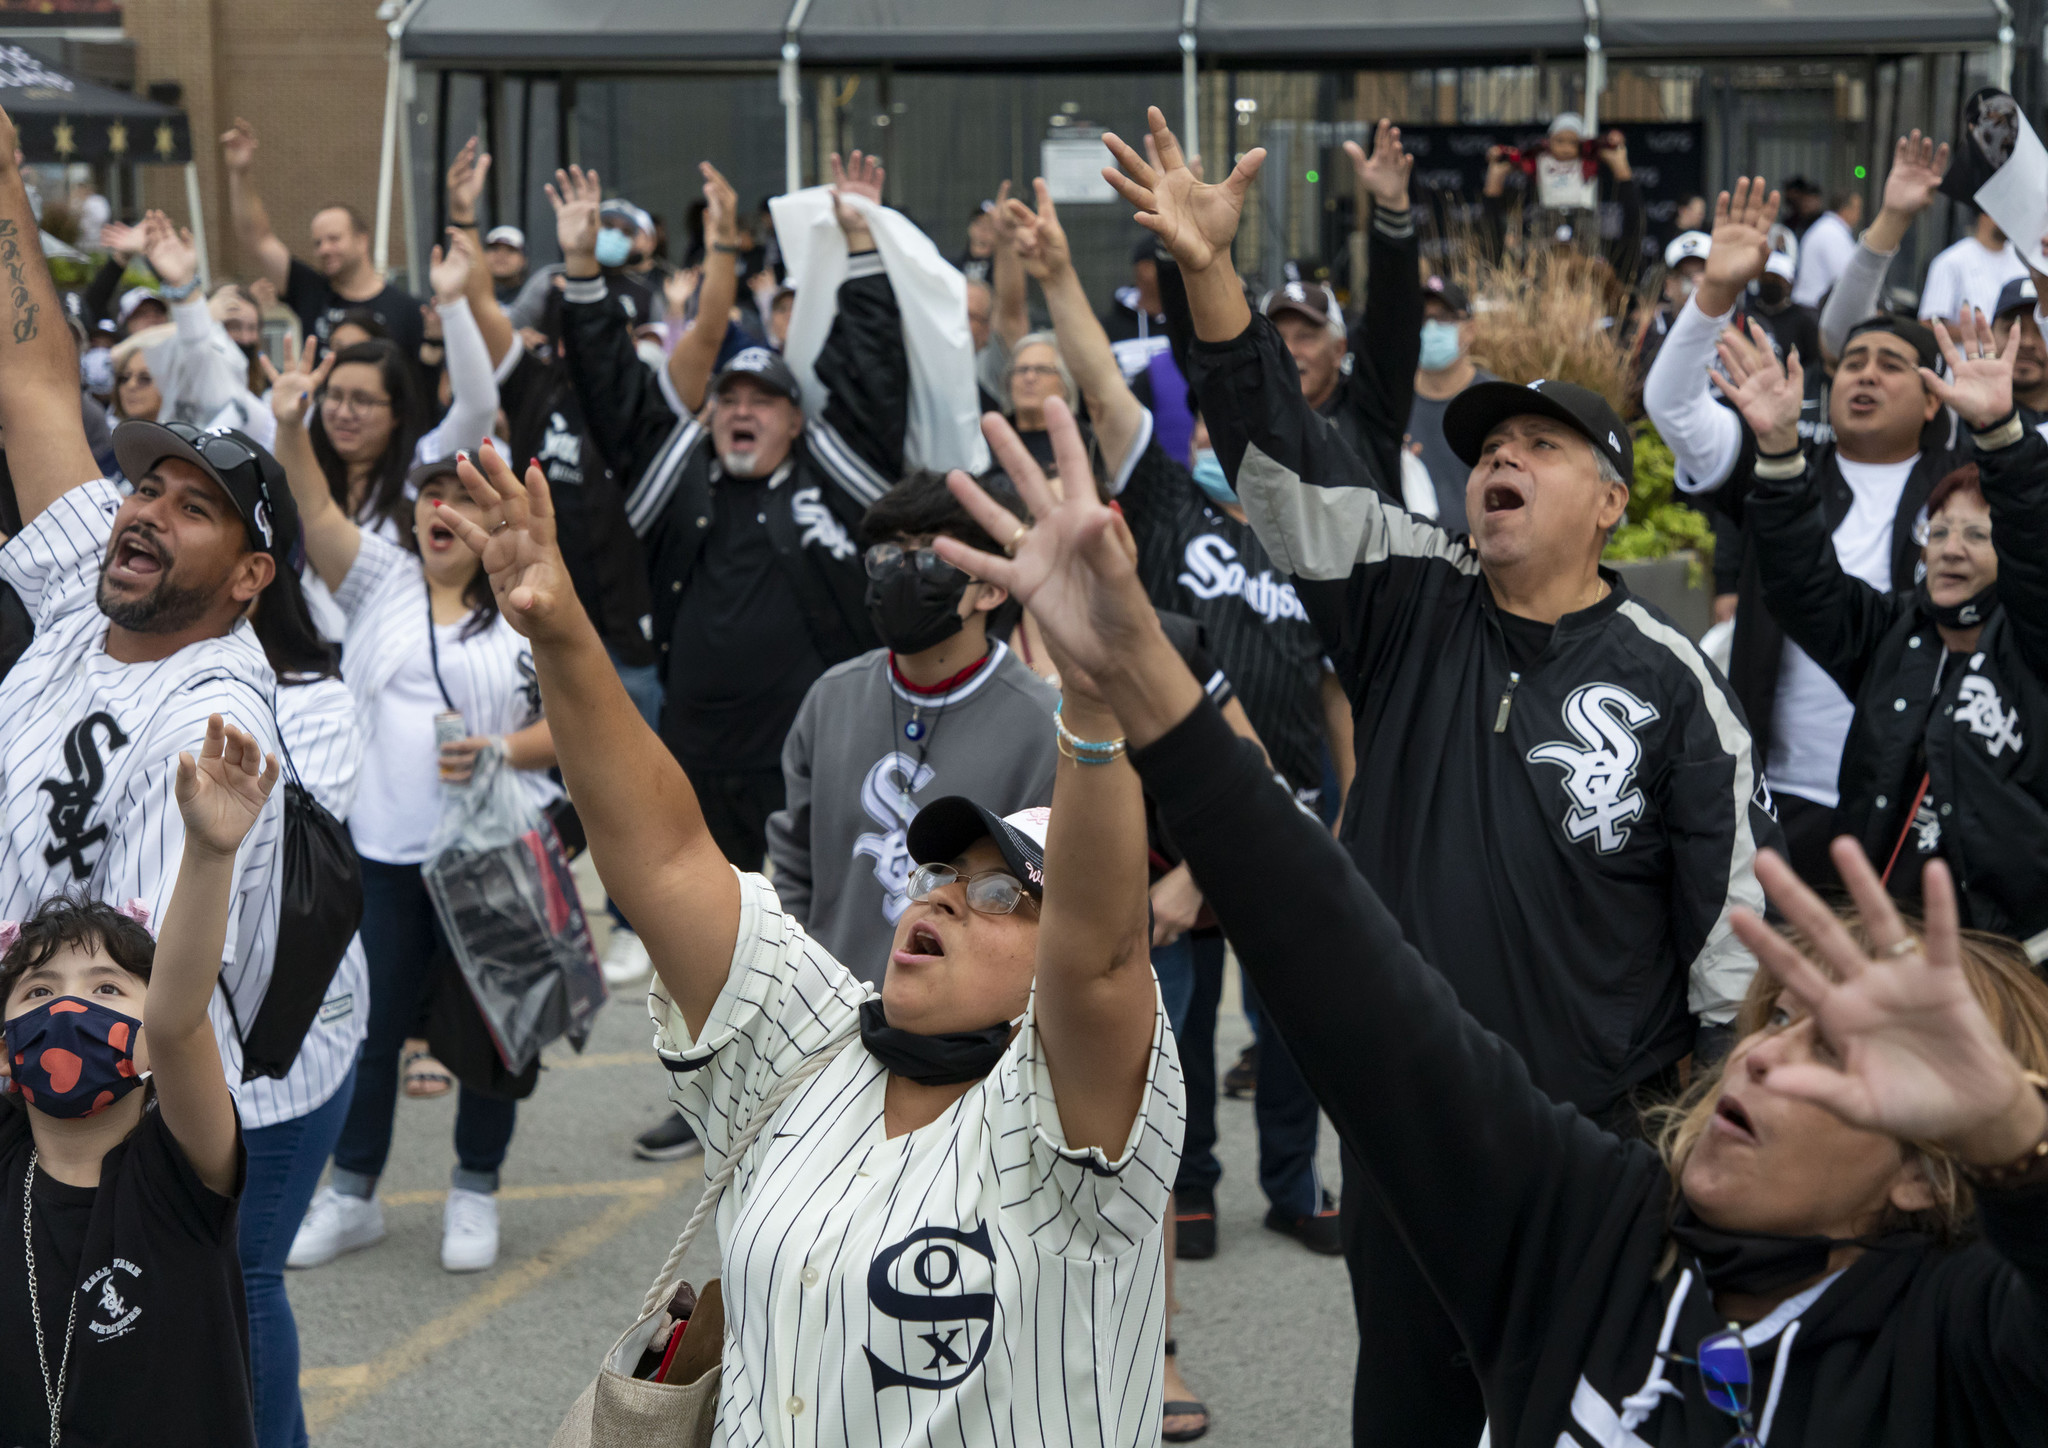 Celebrating White Sox fans, a loyal and not-always-in-attendance